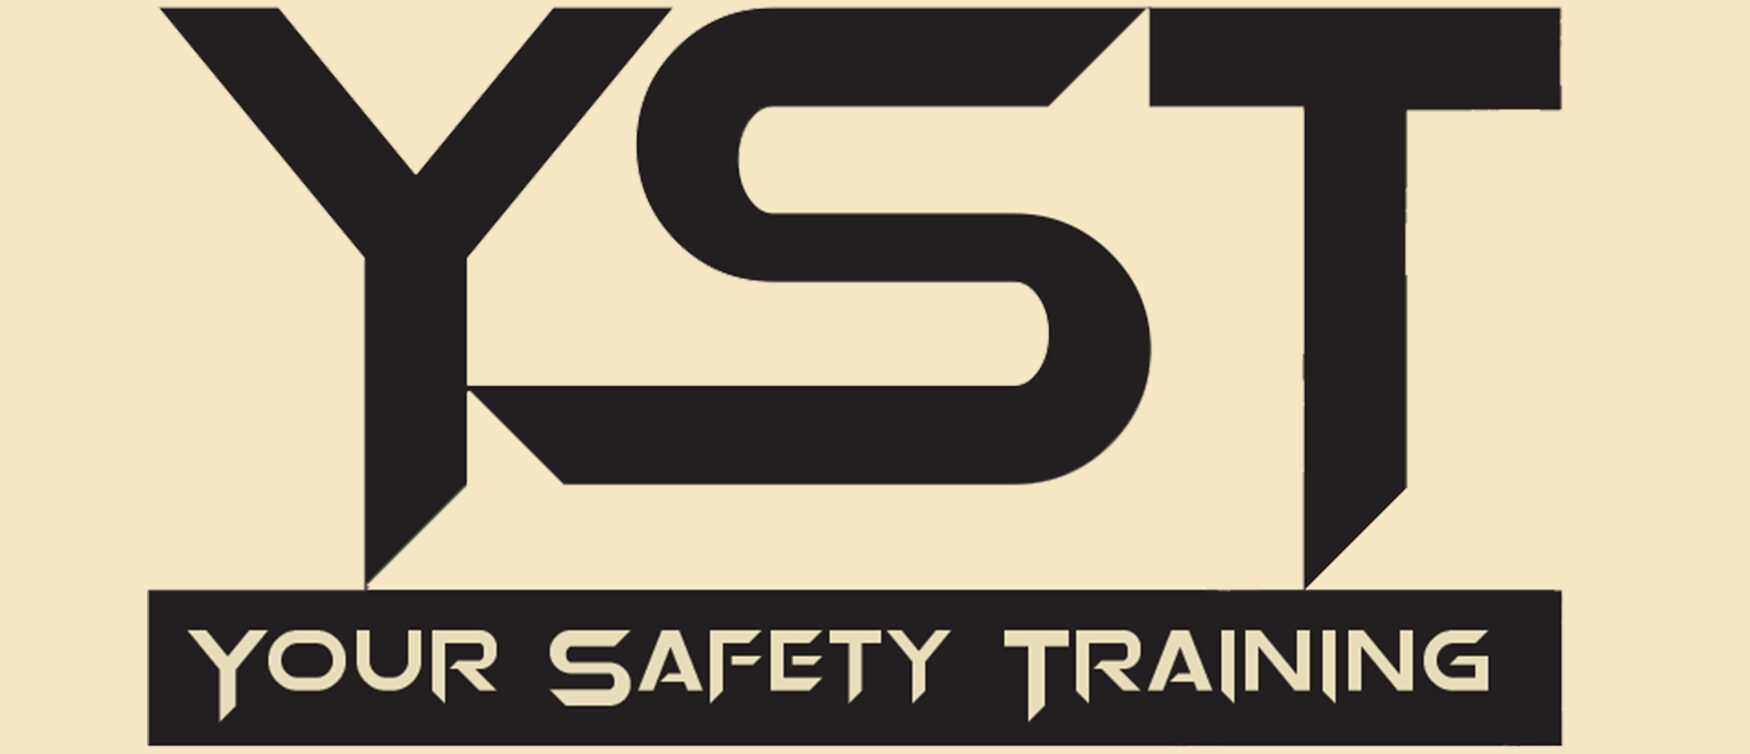 YST Your Safety Training